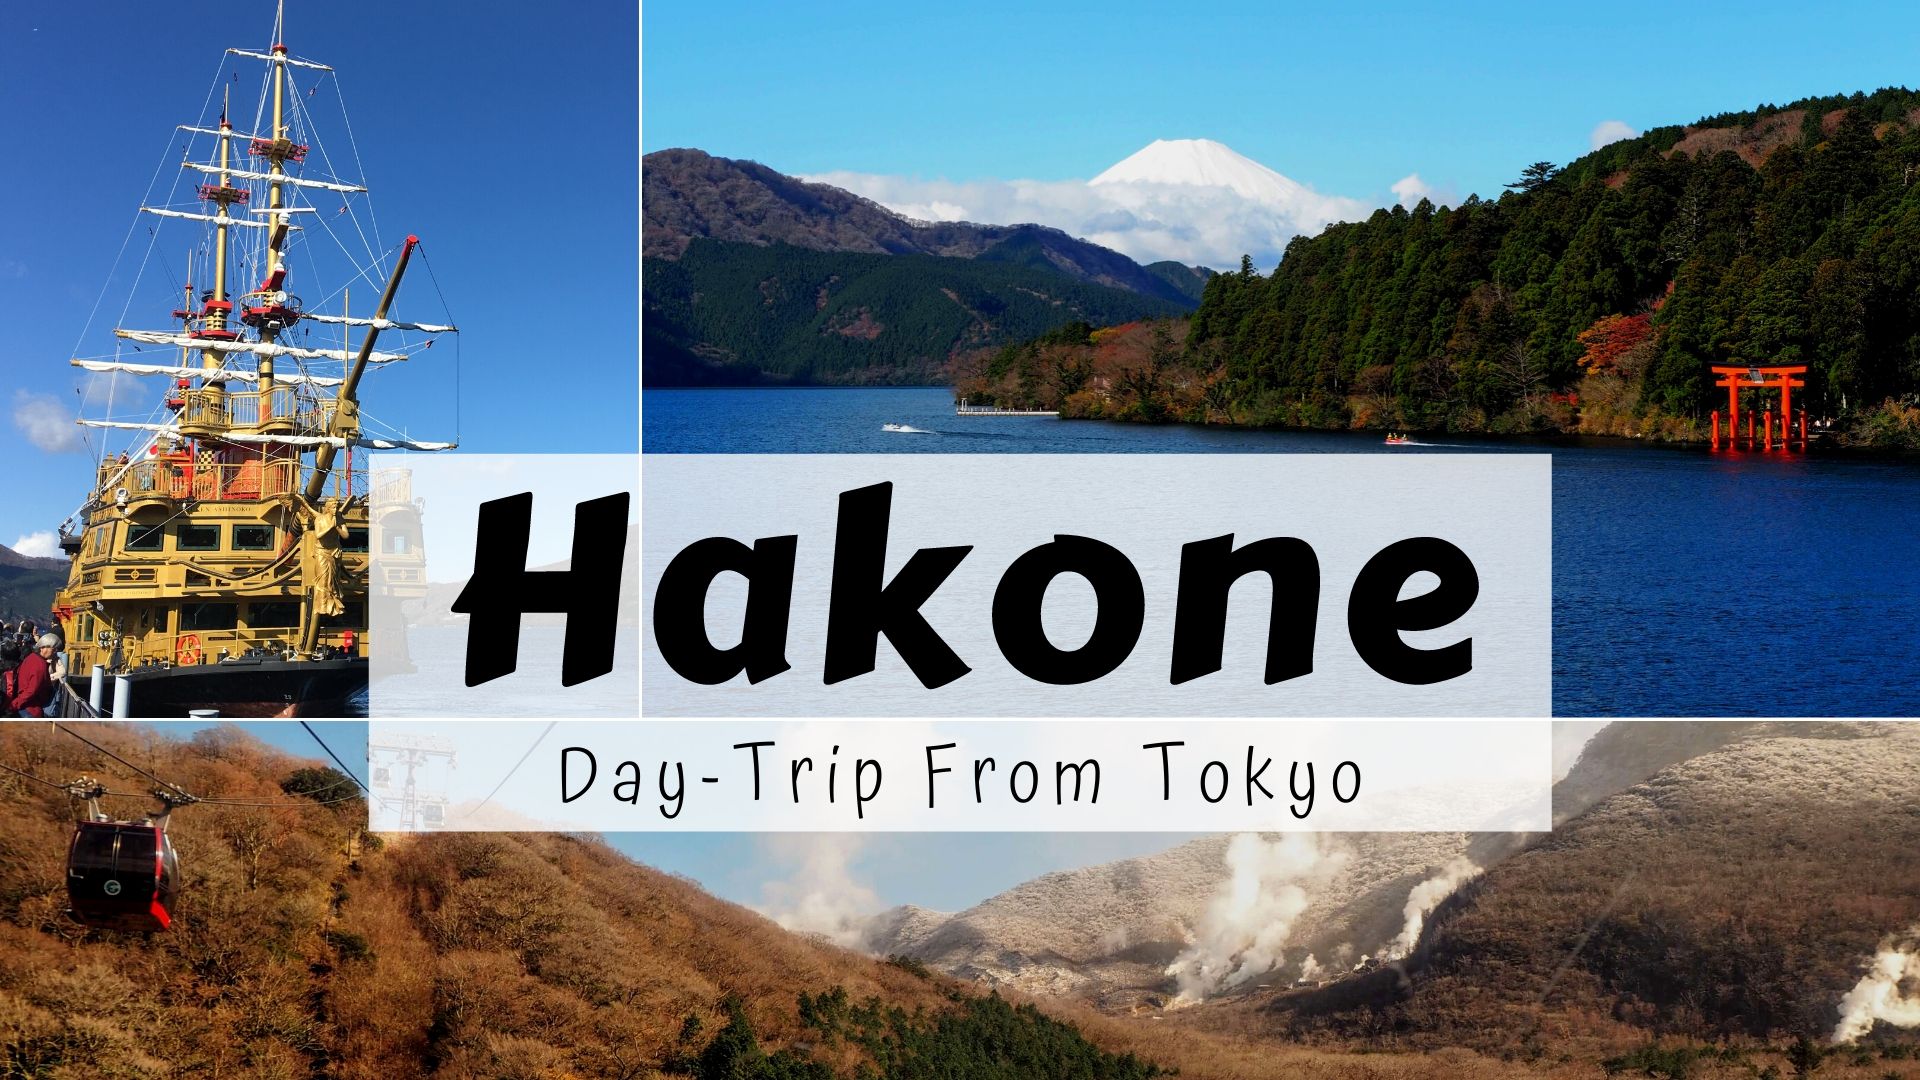 Hakone Free Pass map, one day in Hakone itinerary, Hakone Day trip itinerary, Tokyo to Hakone day trip itinerary, Hakone day trip from TOkyo itinerary cover